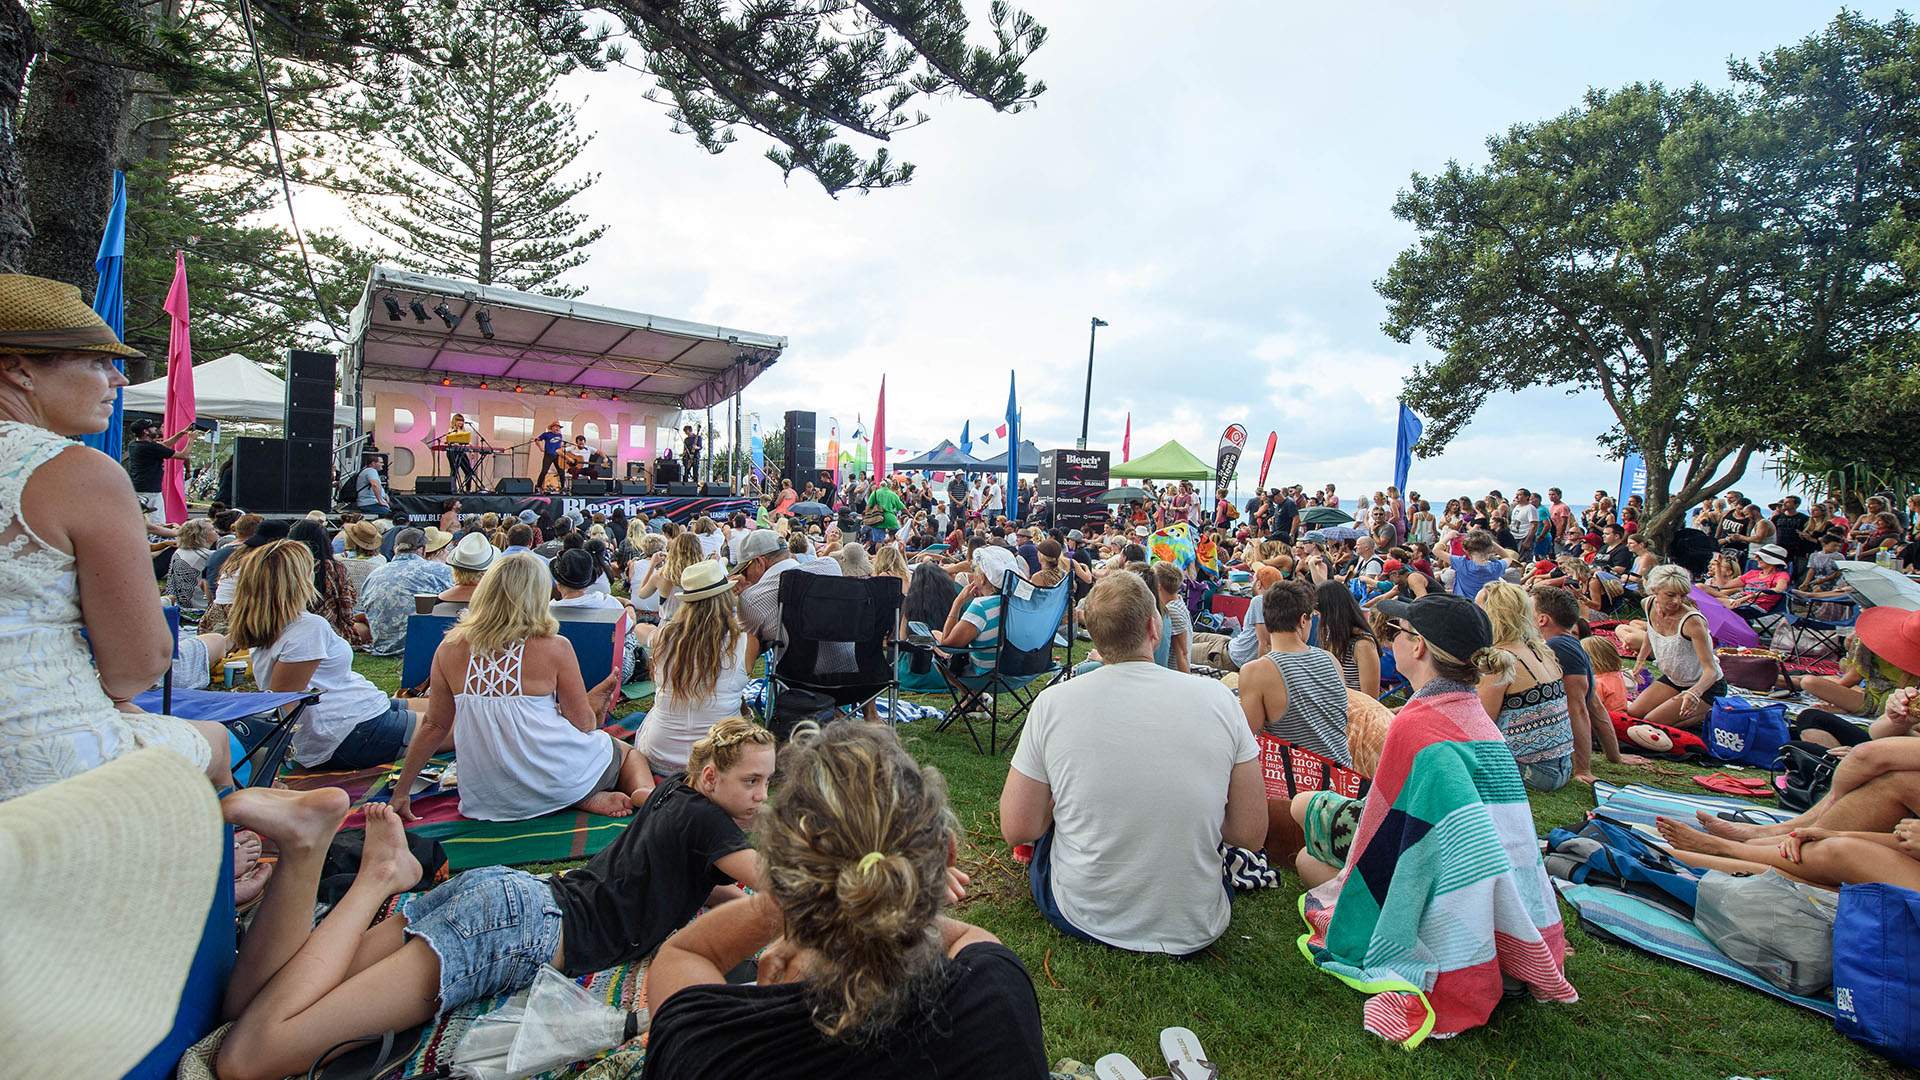 Southeast Queensland Is Getting a Massive Arts Festival Alongside the Commonwealth Games